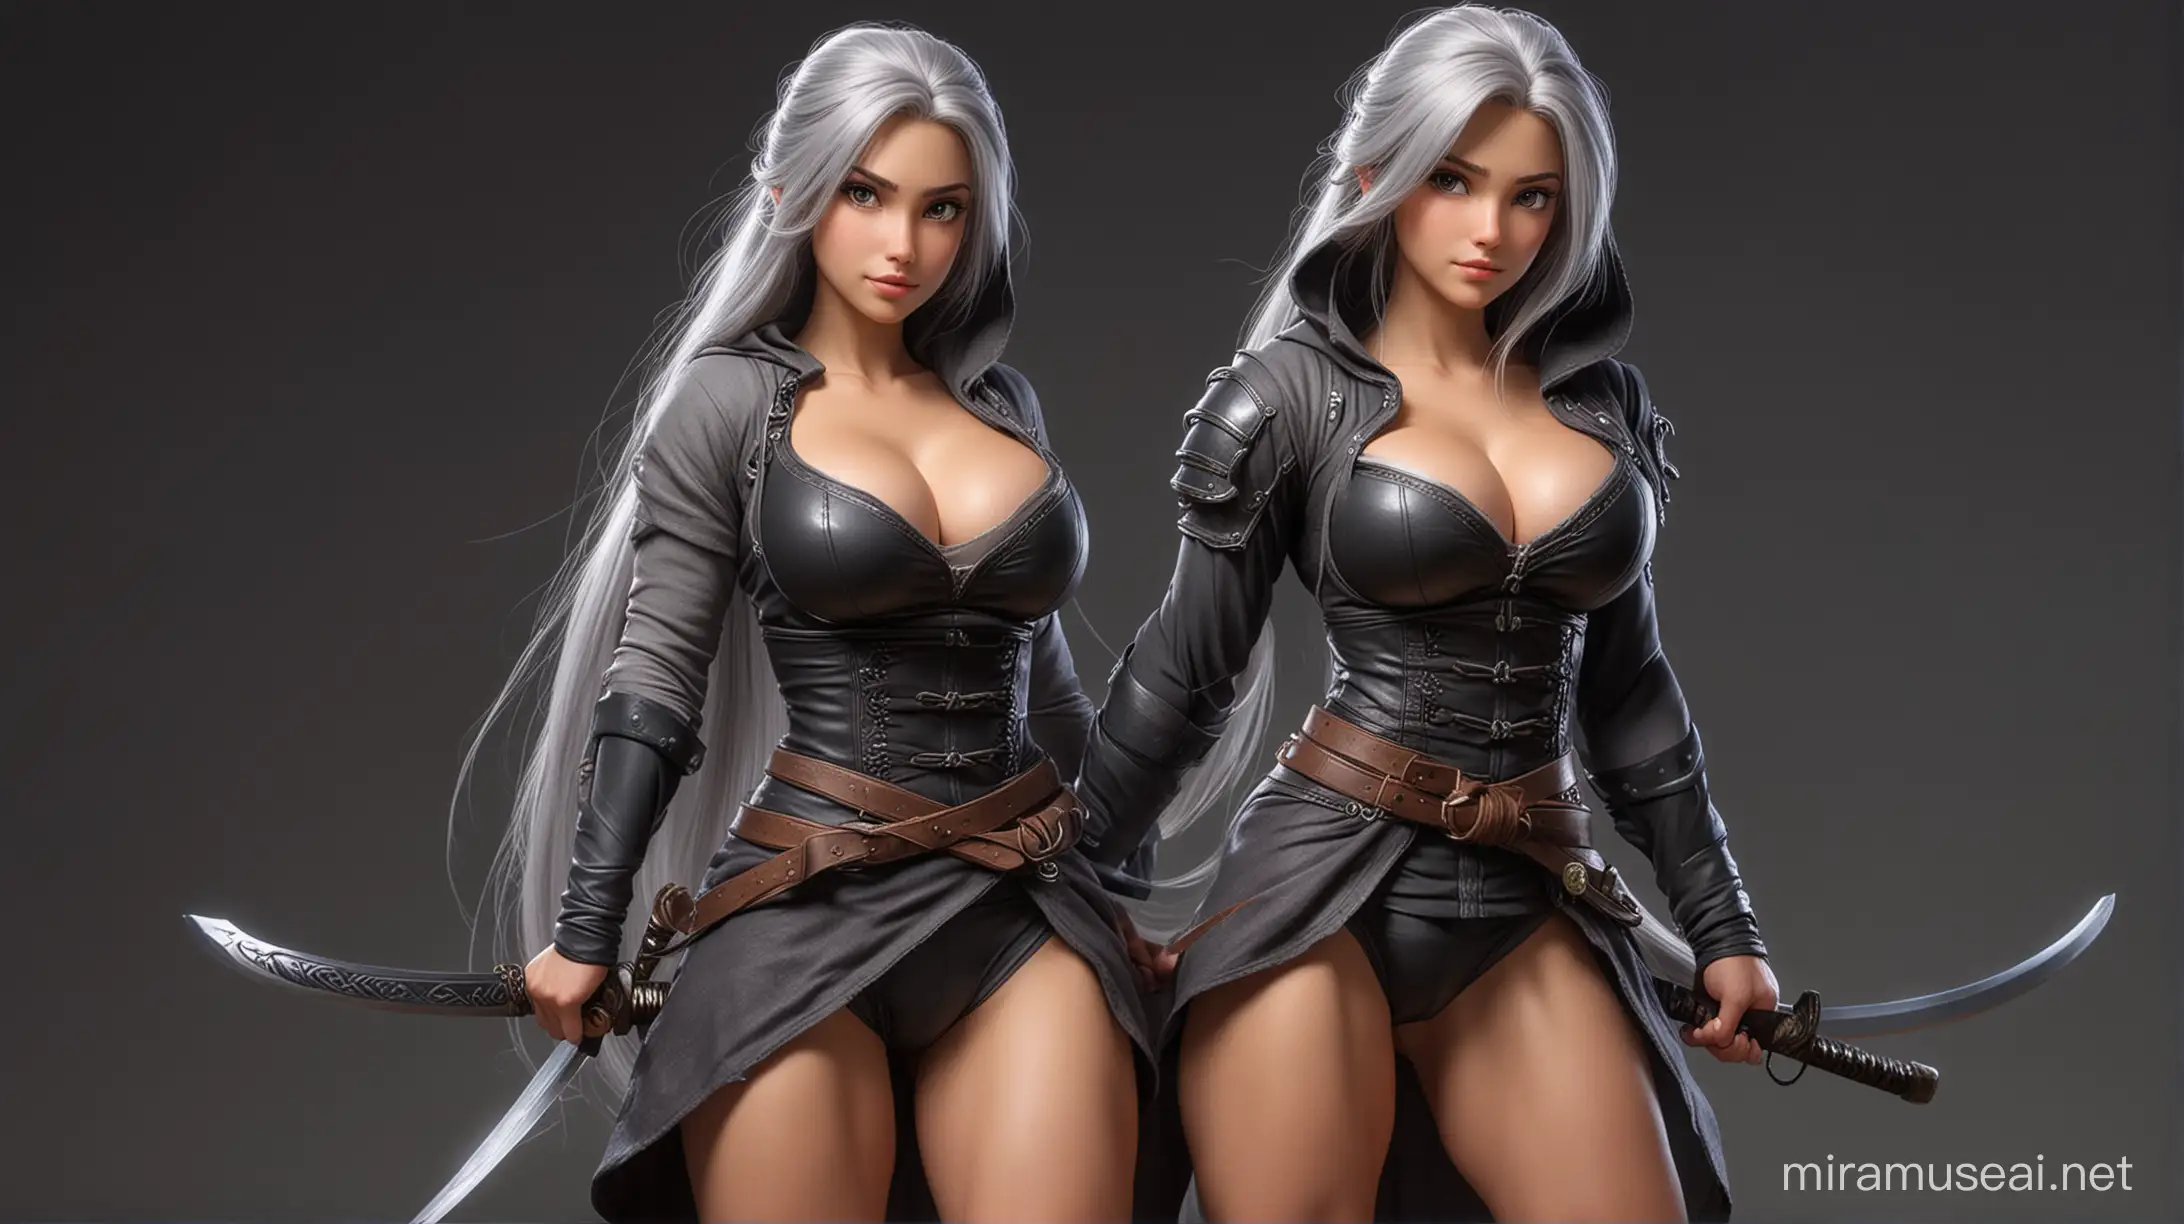 extremely gigantic woman; extremely muscular; samurai; hooded; beautiful; sexy; seductive; cute; Rapunzel-like hair; grey hair; very big breasts; extremely muscular thighs; 